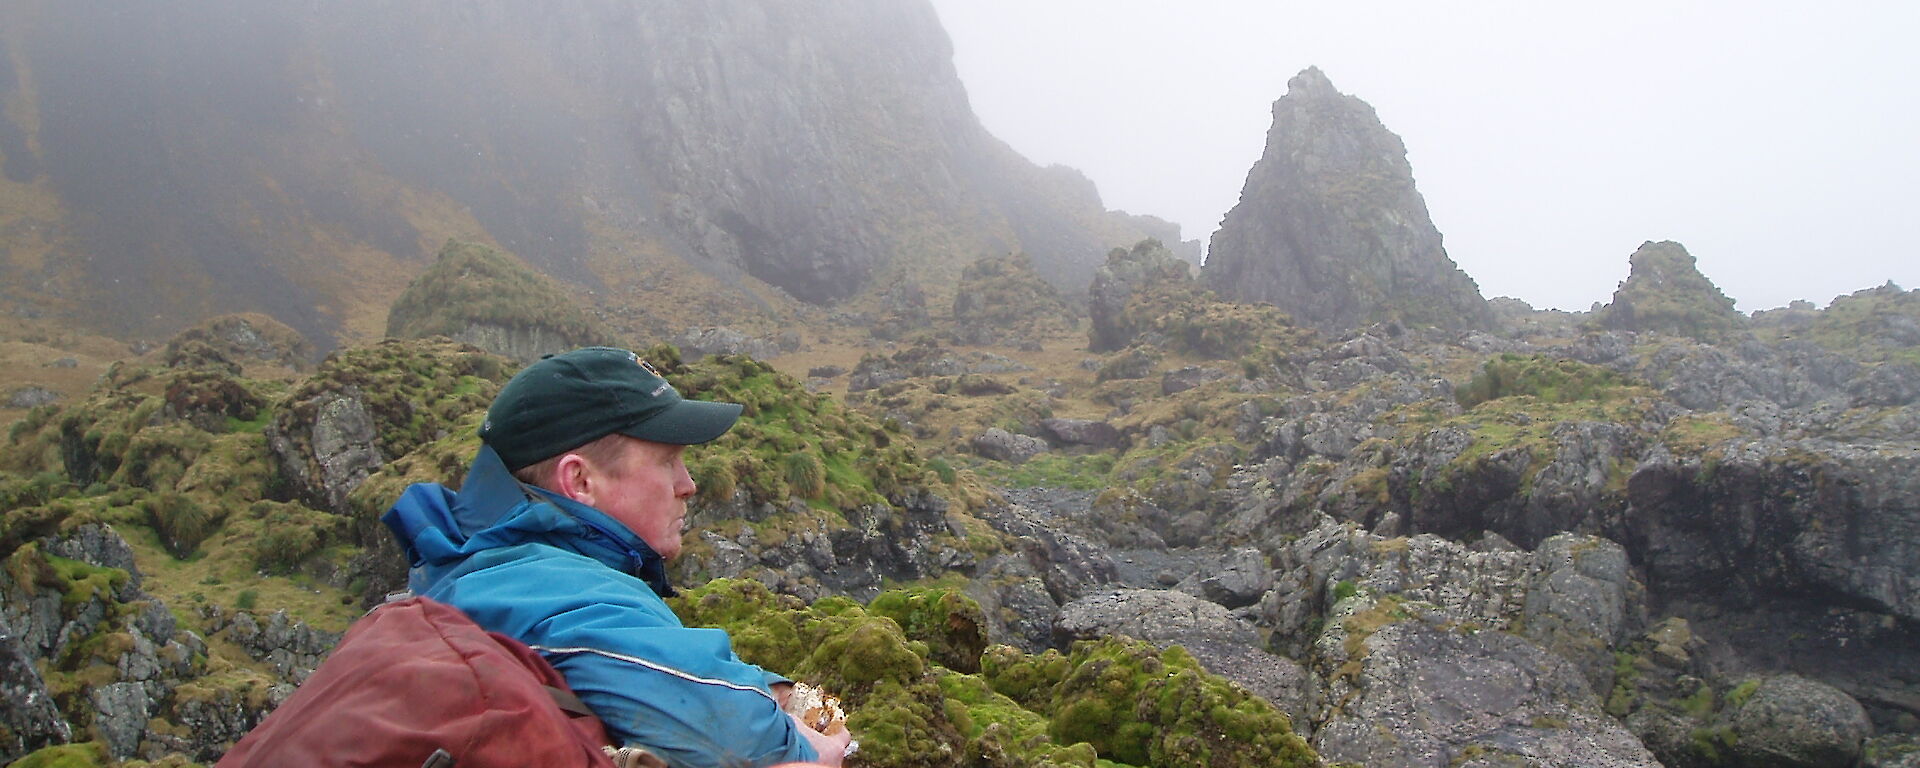 Ranger Chris sits amongst the mossy rocks of Macquarie Island looking reflective